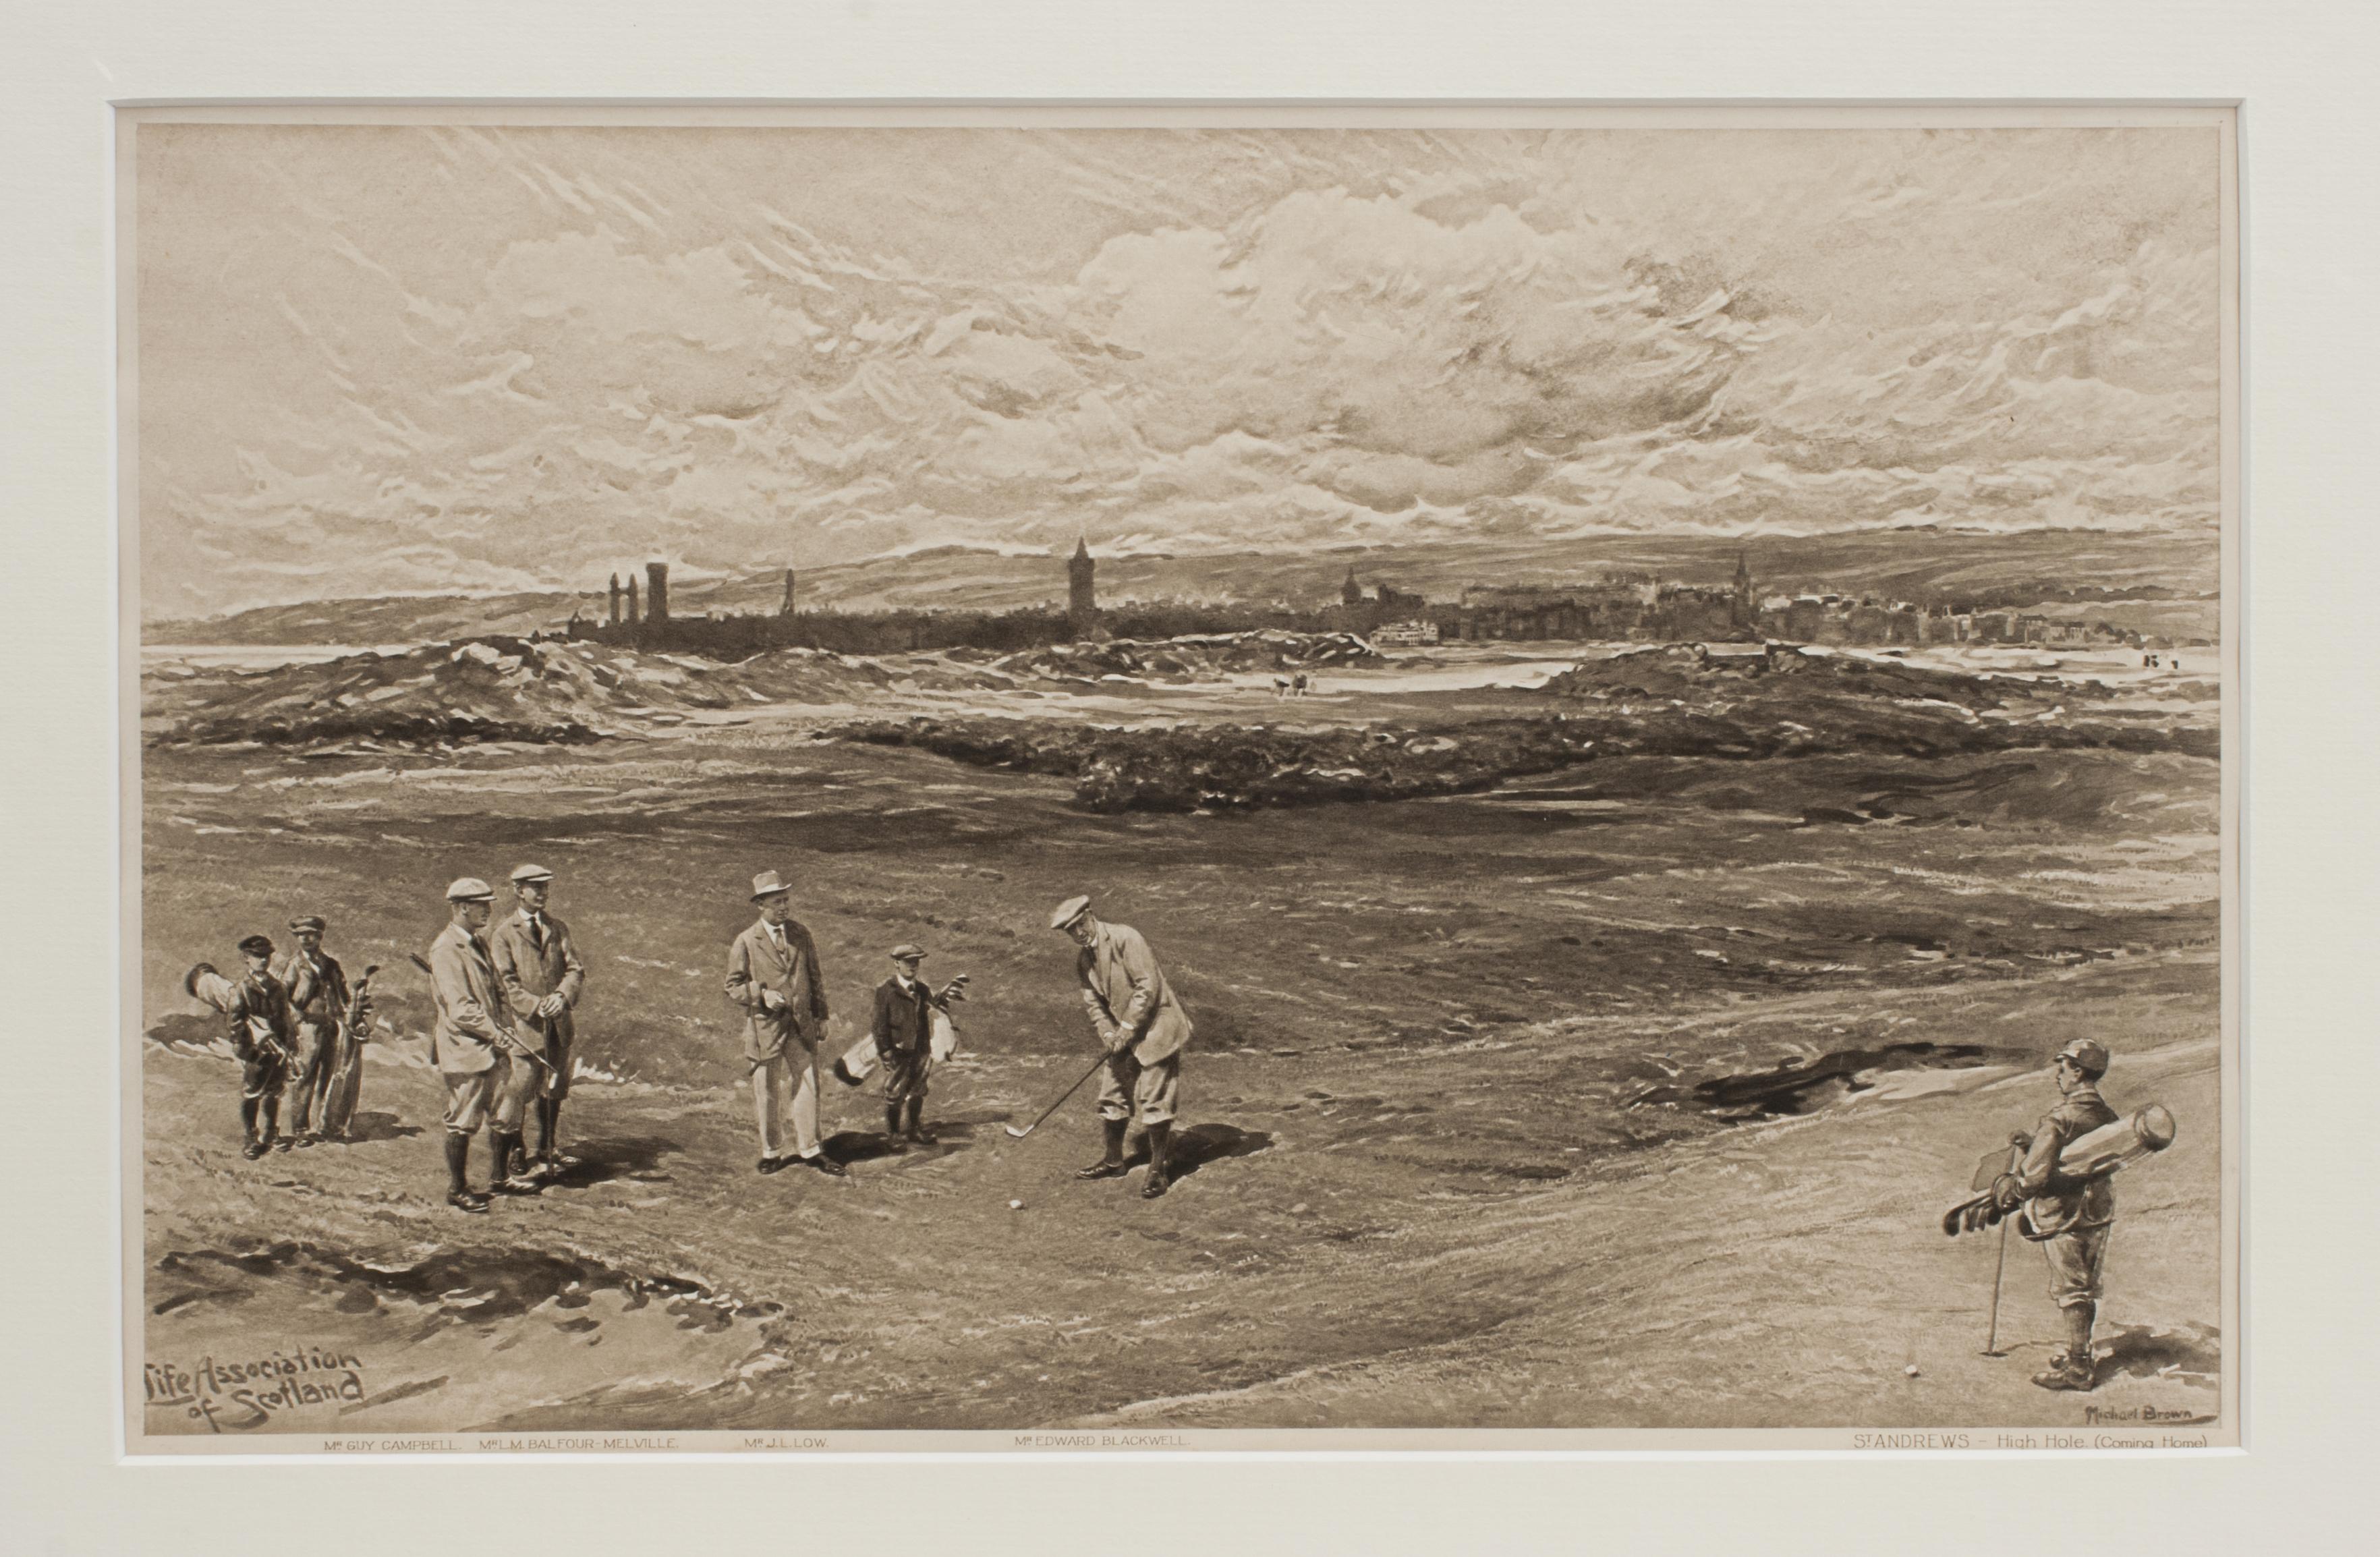 Michael Brown Life Association Golf Photogravure, St. Andrews - High Hole.
A golf photogravure after Michael Brown: St. Andrews - High Hole. (Coming Home), from his famous series of scenes commissioned by the Life Association of Scotland for their